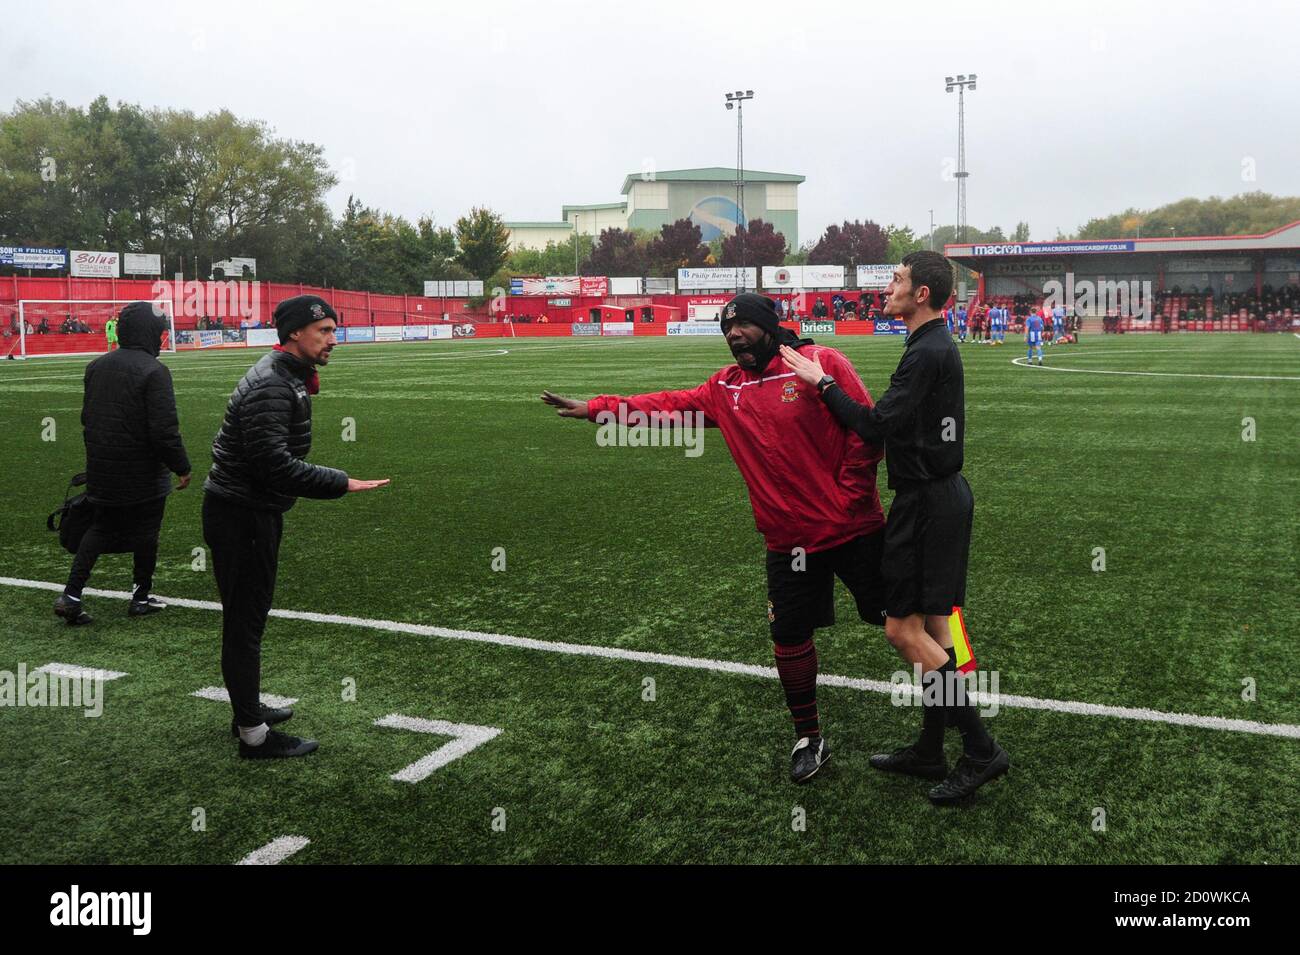 Tamworth manager Andrew Danylyszyn talks to a linesman regarding an incident on the pitch during the FA Cup Second Round Qualifying match at The Lamb Ground, Tamworth. Stock Photo